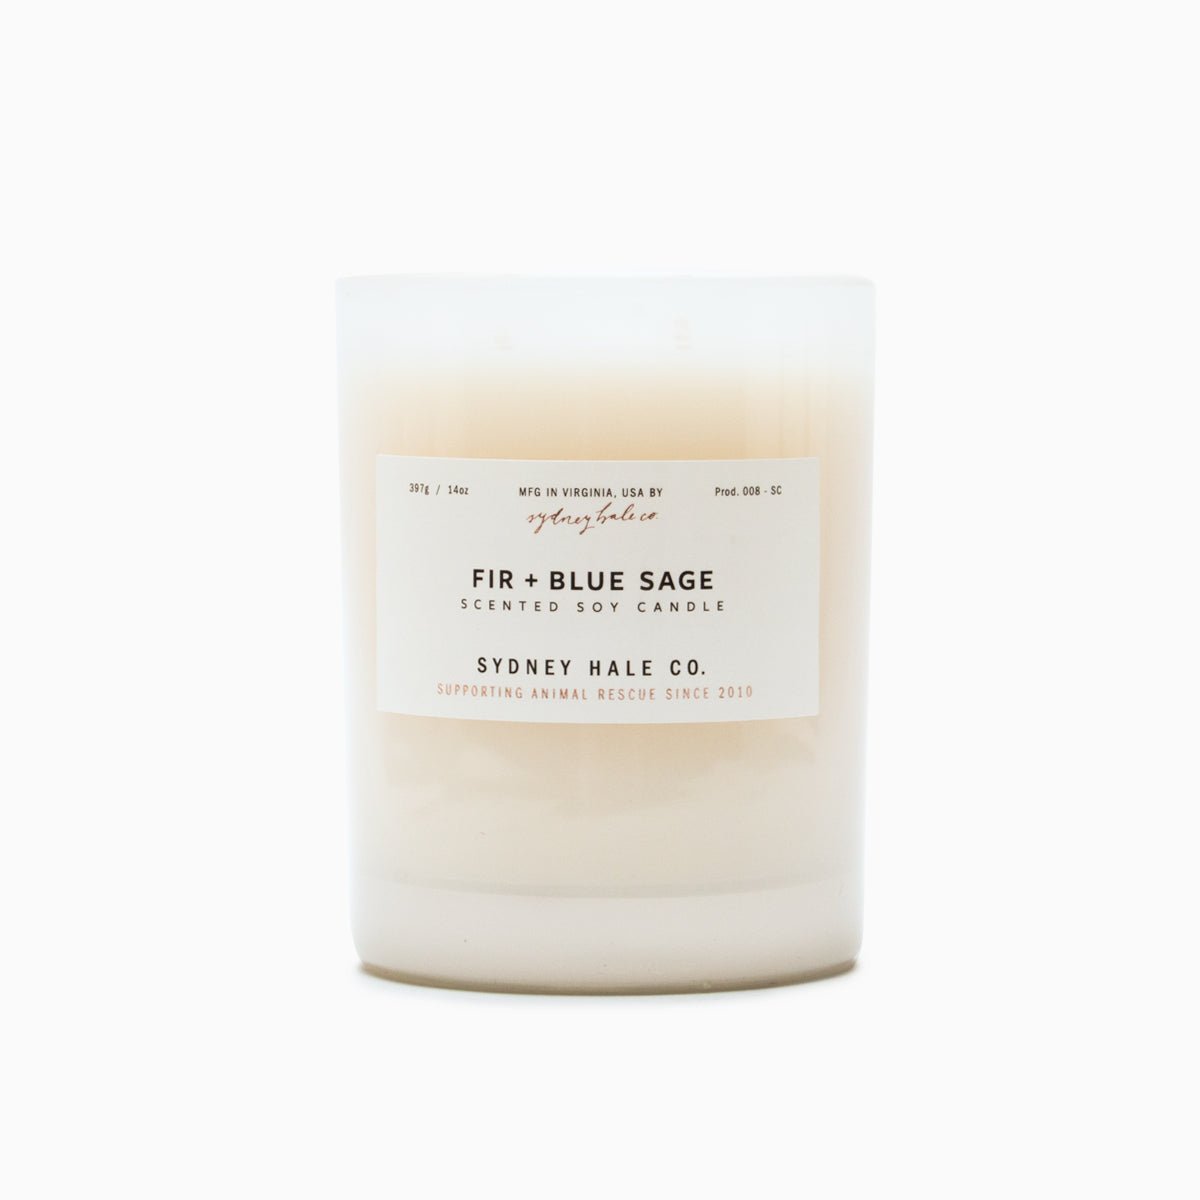 A cylindrical glass candle filled with a soy wax blend and two double cotton wicks. Label reads: "397g/14 oz. Manufactured in Virginia, USA by Sydney Hale Co. Fir + Blue Sage scented soy candle. Sydney Hale Co. Supporting Animal rescue since 2010." 